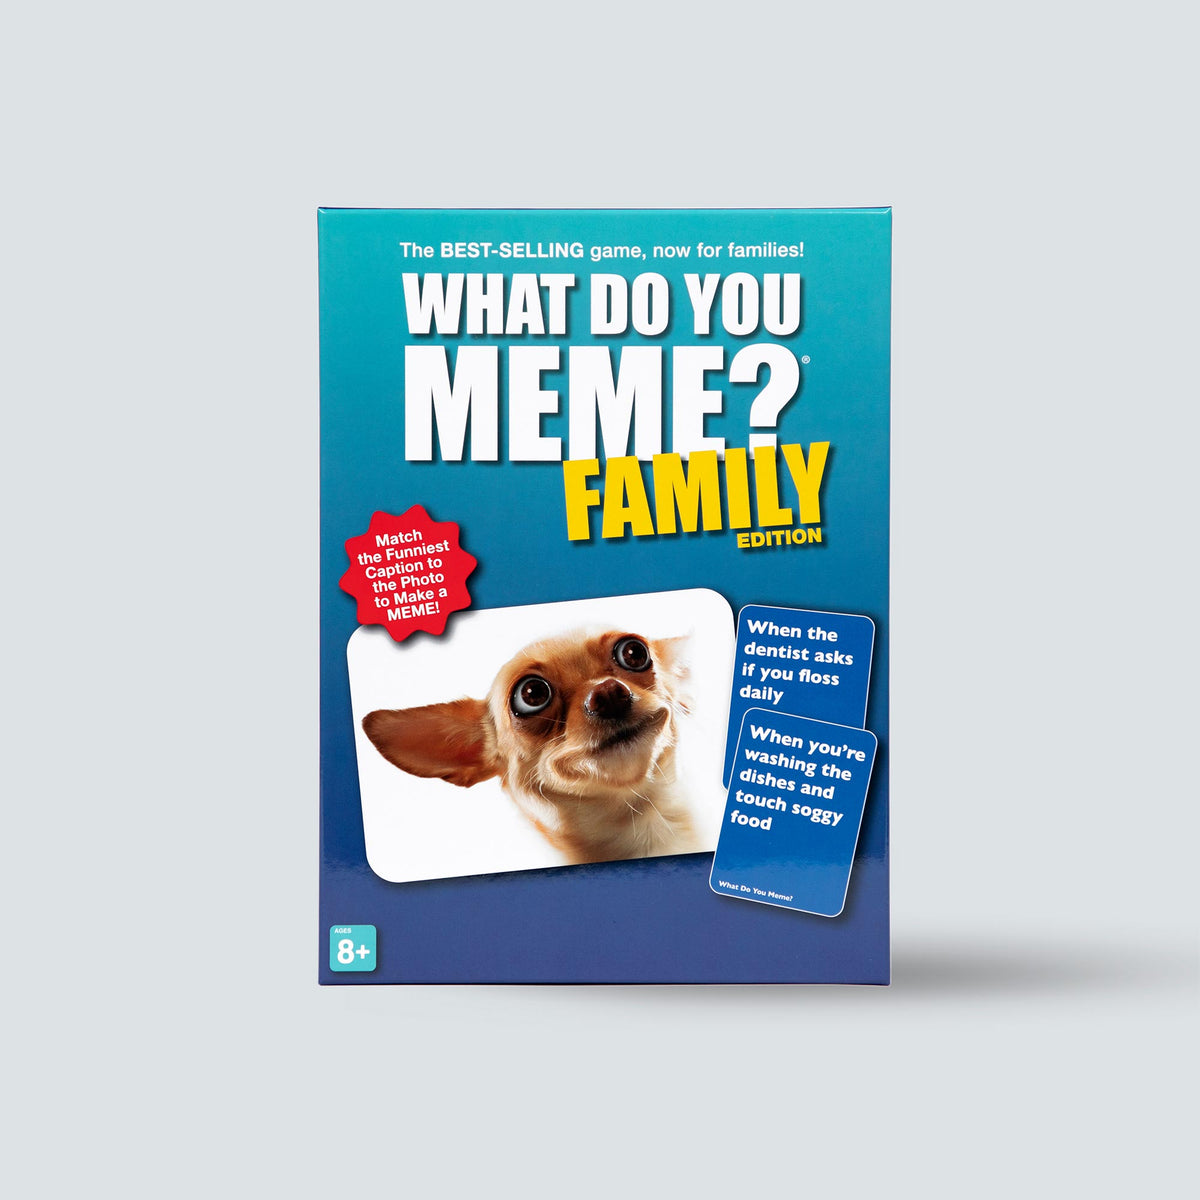 What Do You Meme?® Family Edition